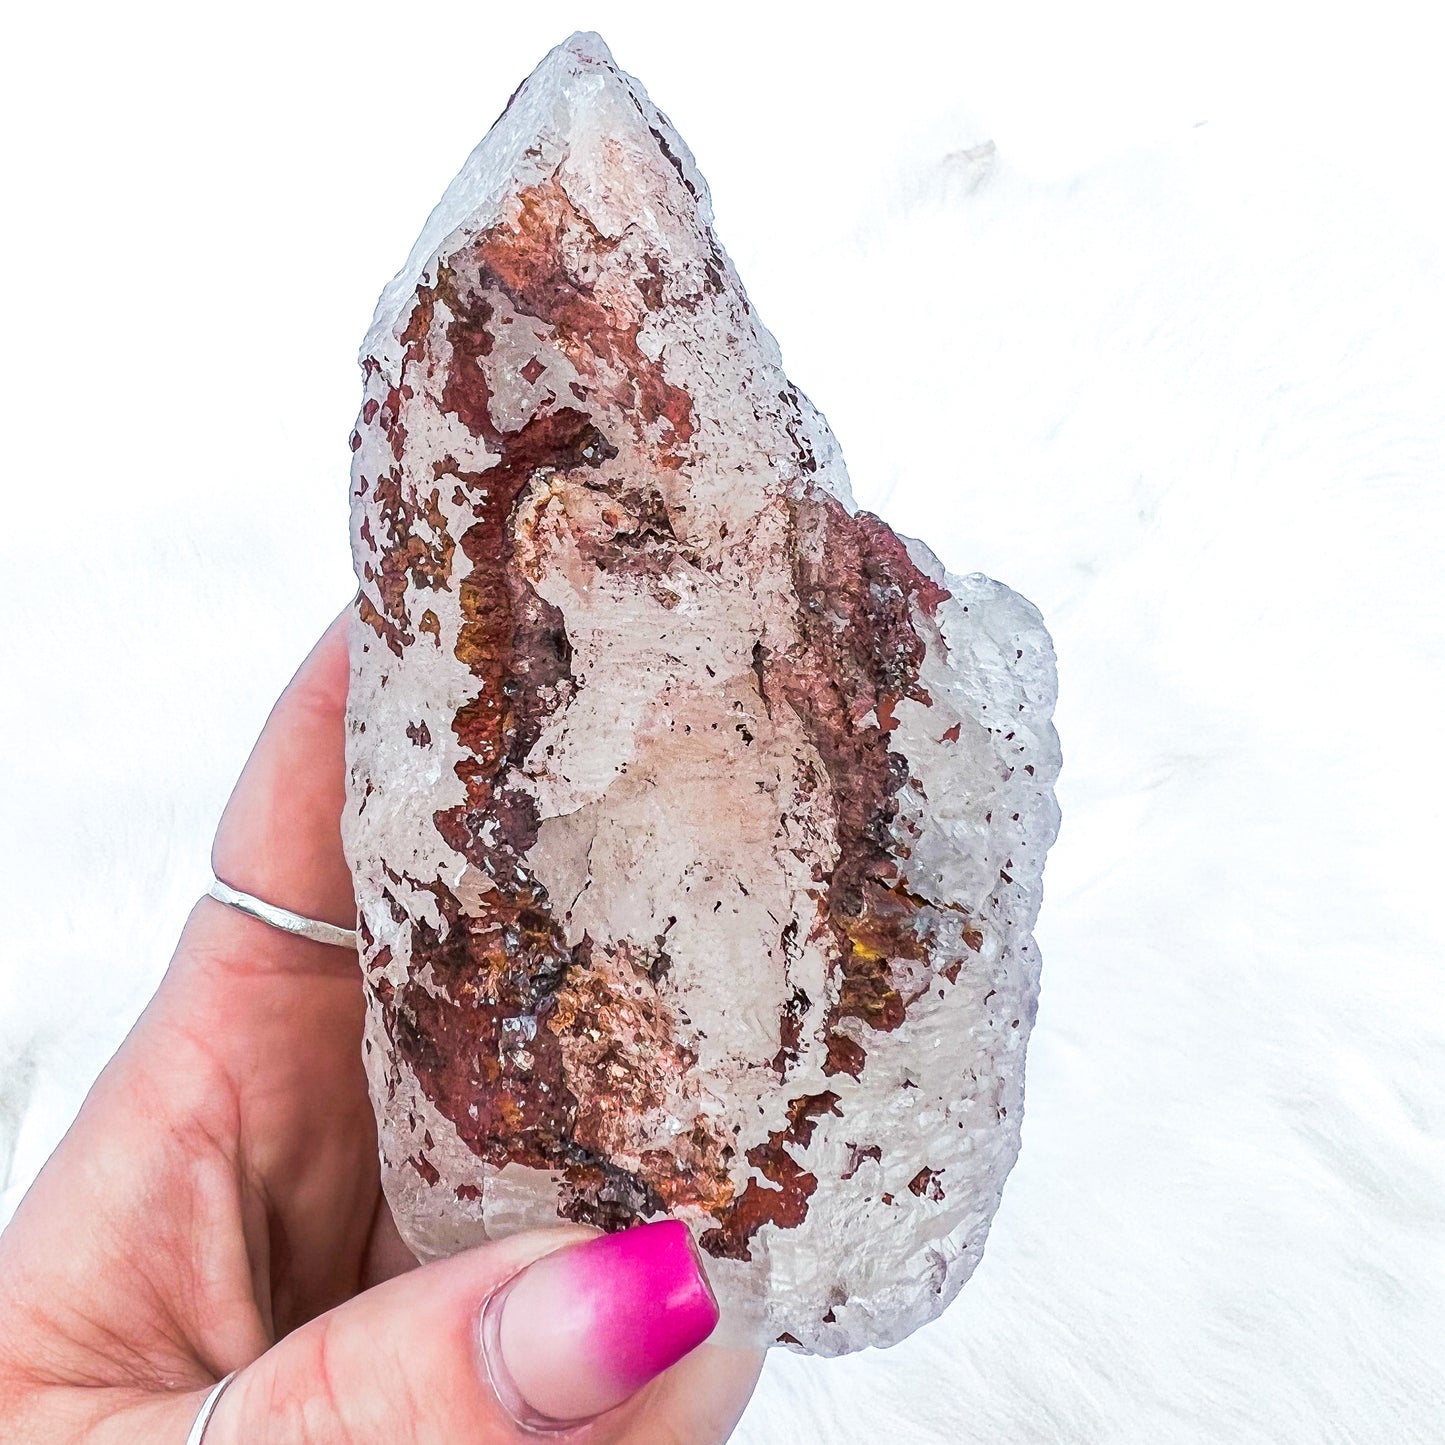 Red Nirvana Quartz: Deepen Spiritual Connection and Overcome Difficulty. Available in various sizes.